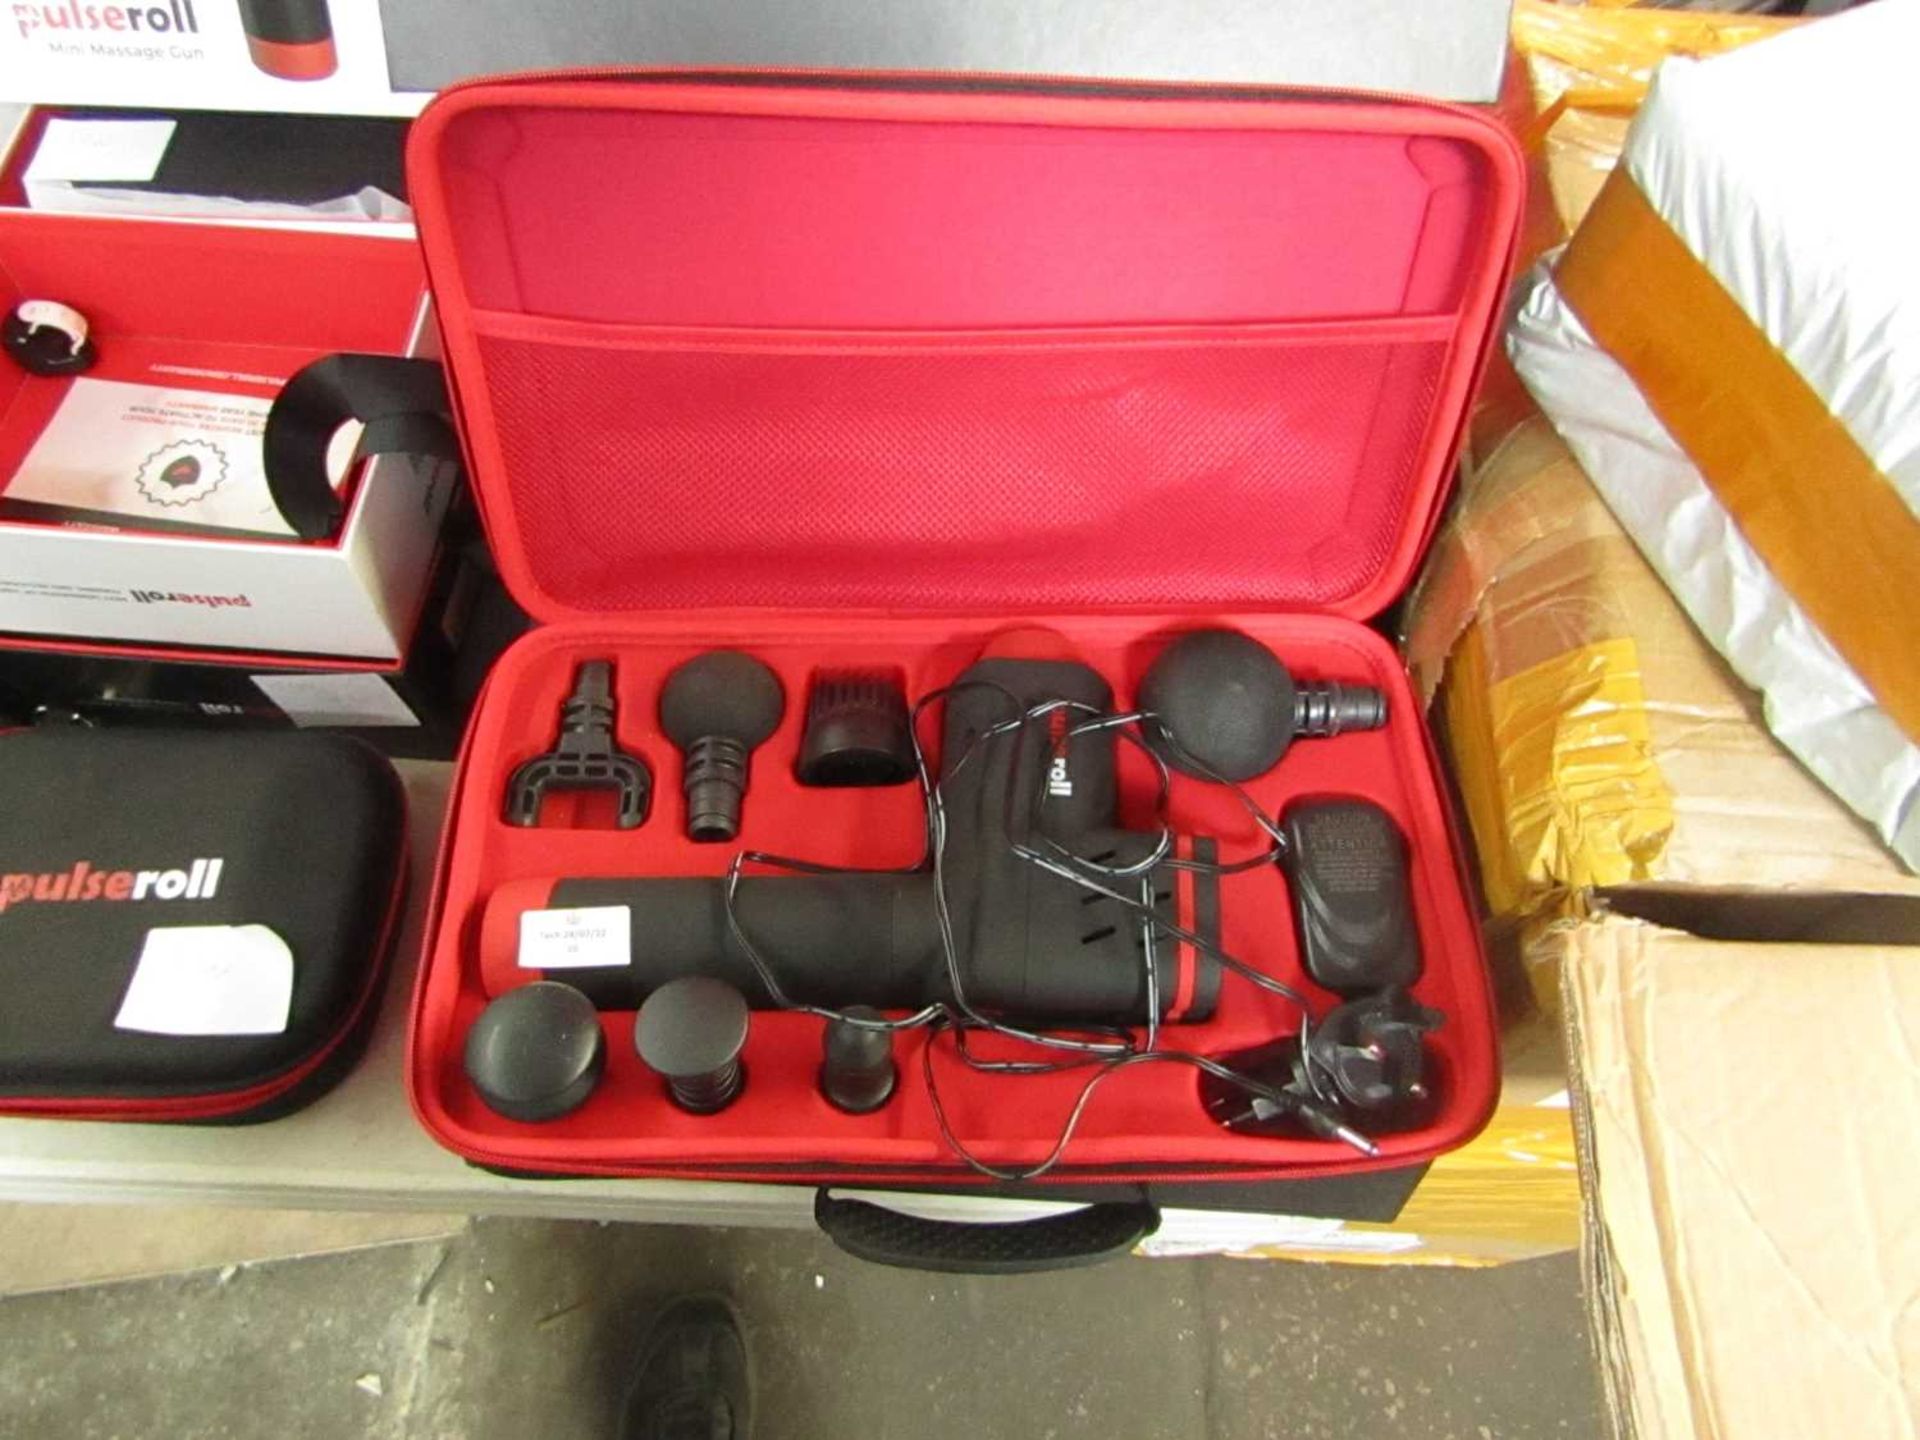 VAT Pulse roll Percussion Massage Gun, tested working for percussion with the power it currently